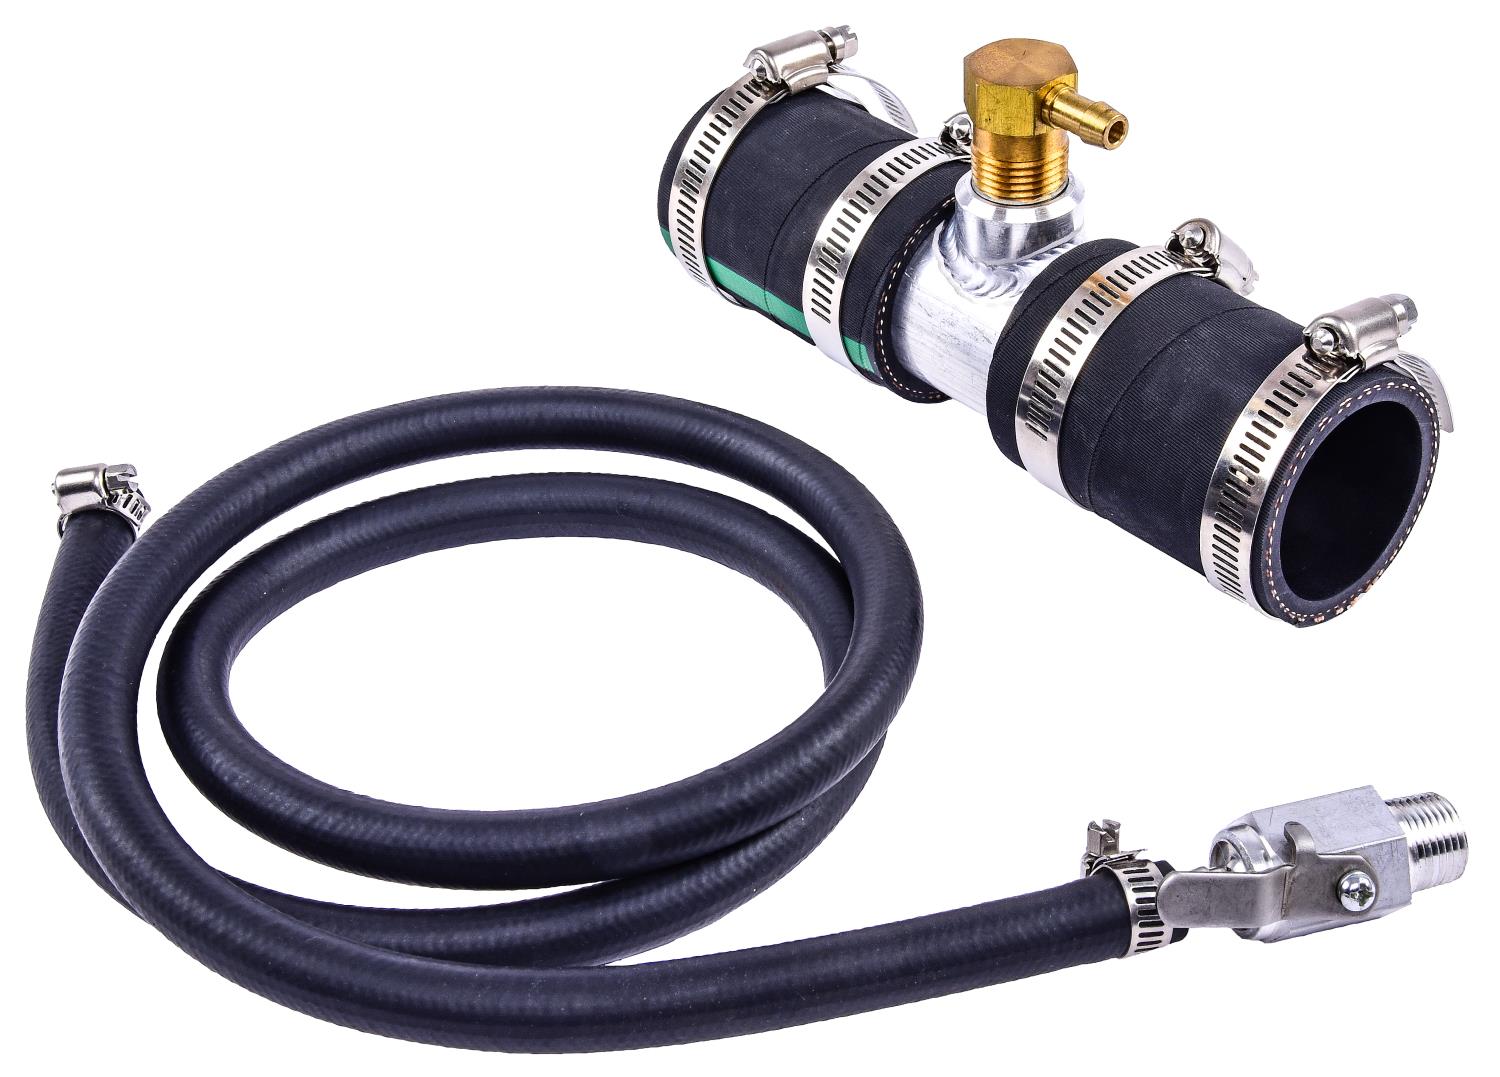 Diesel Auxiliary Tank Install Kit [1.500 in. Fill Line]